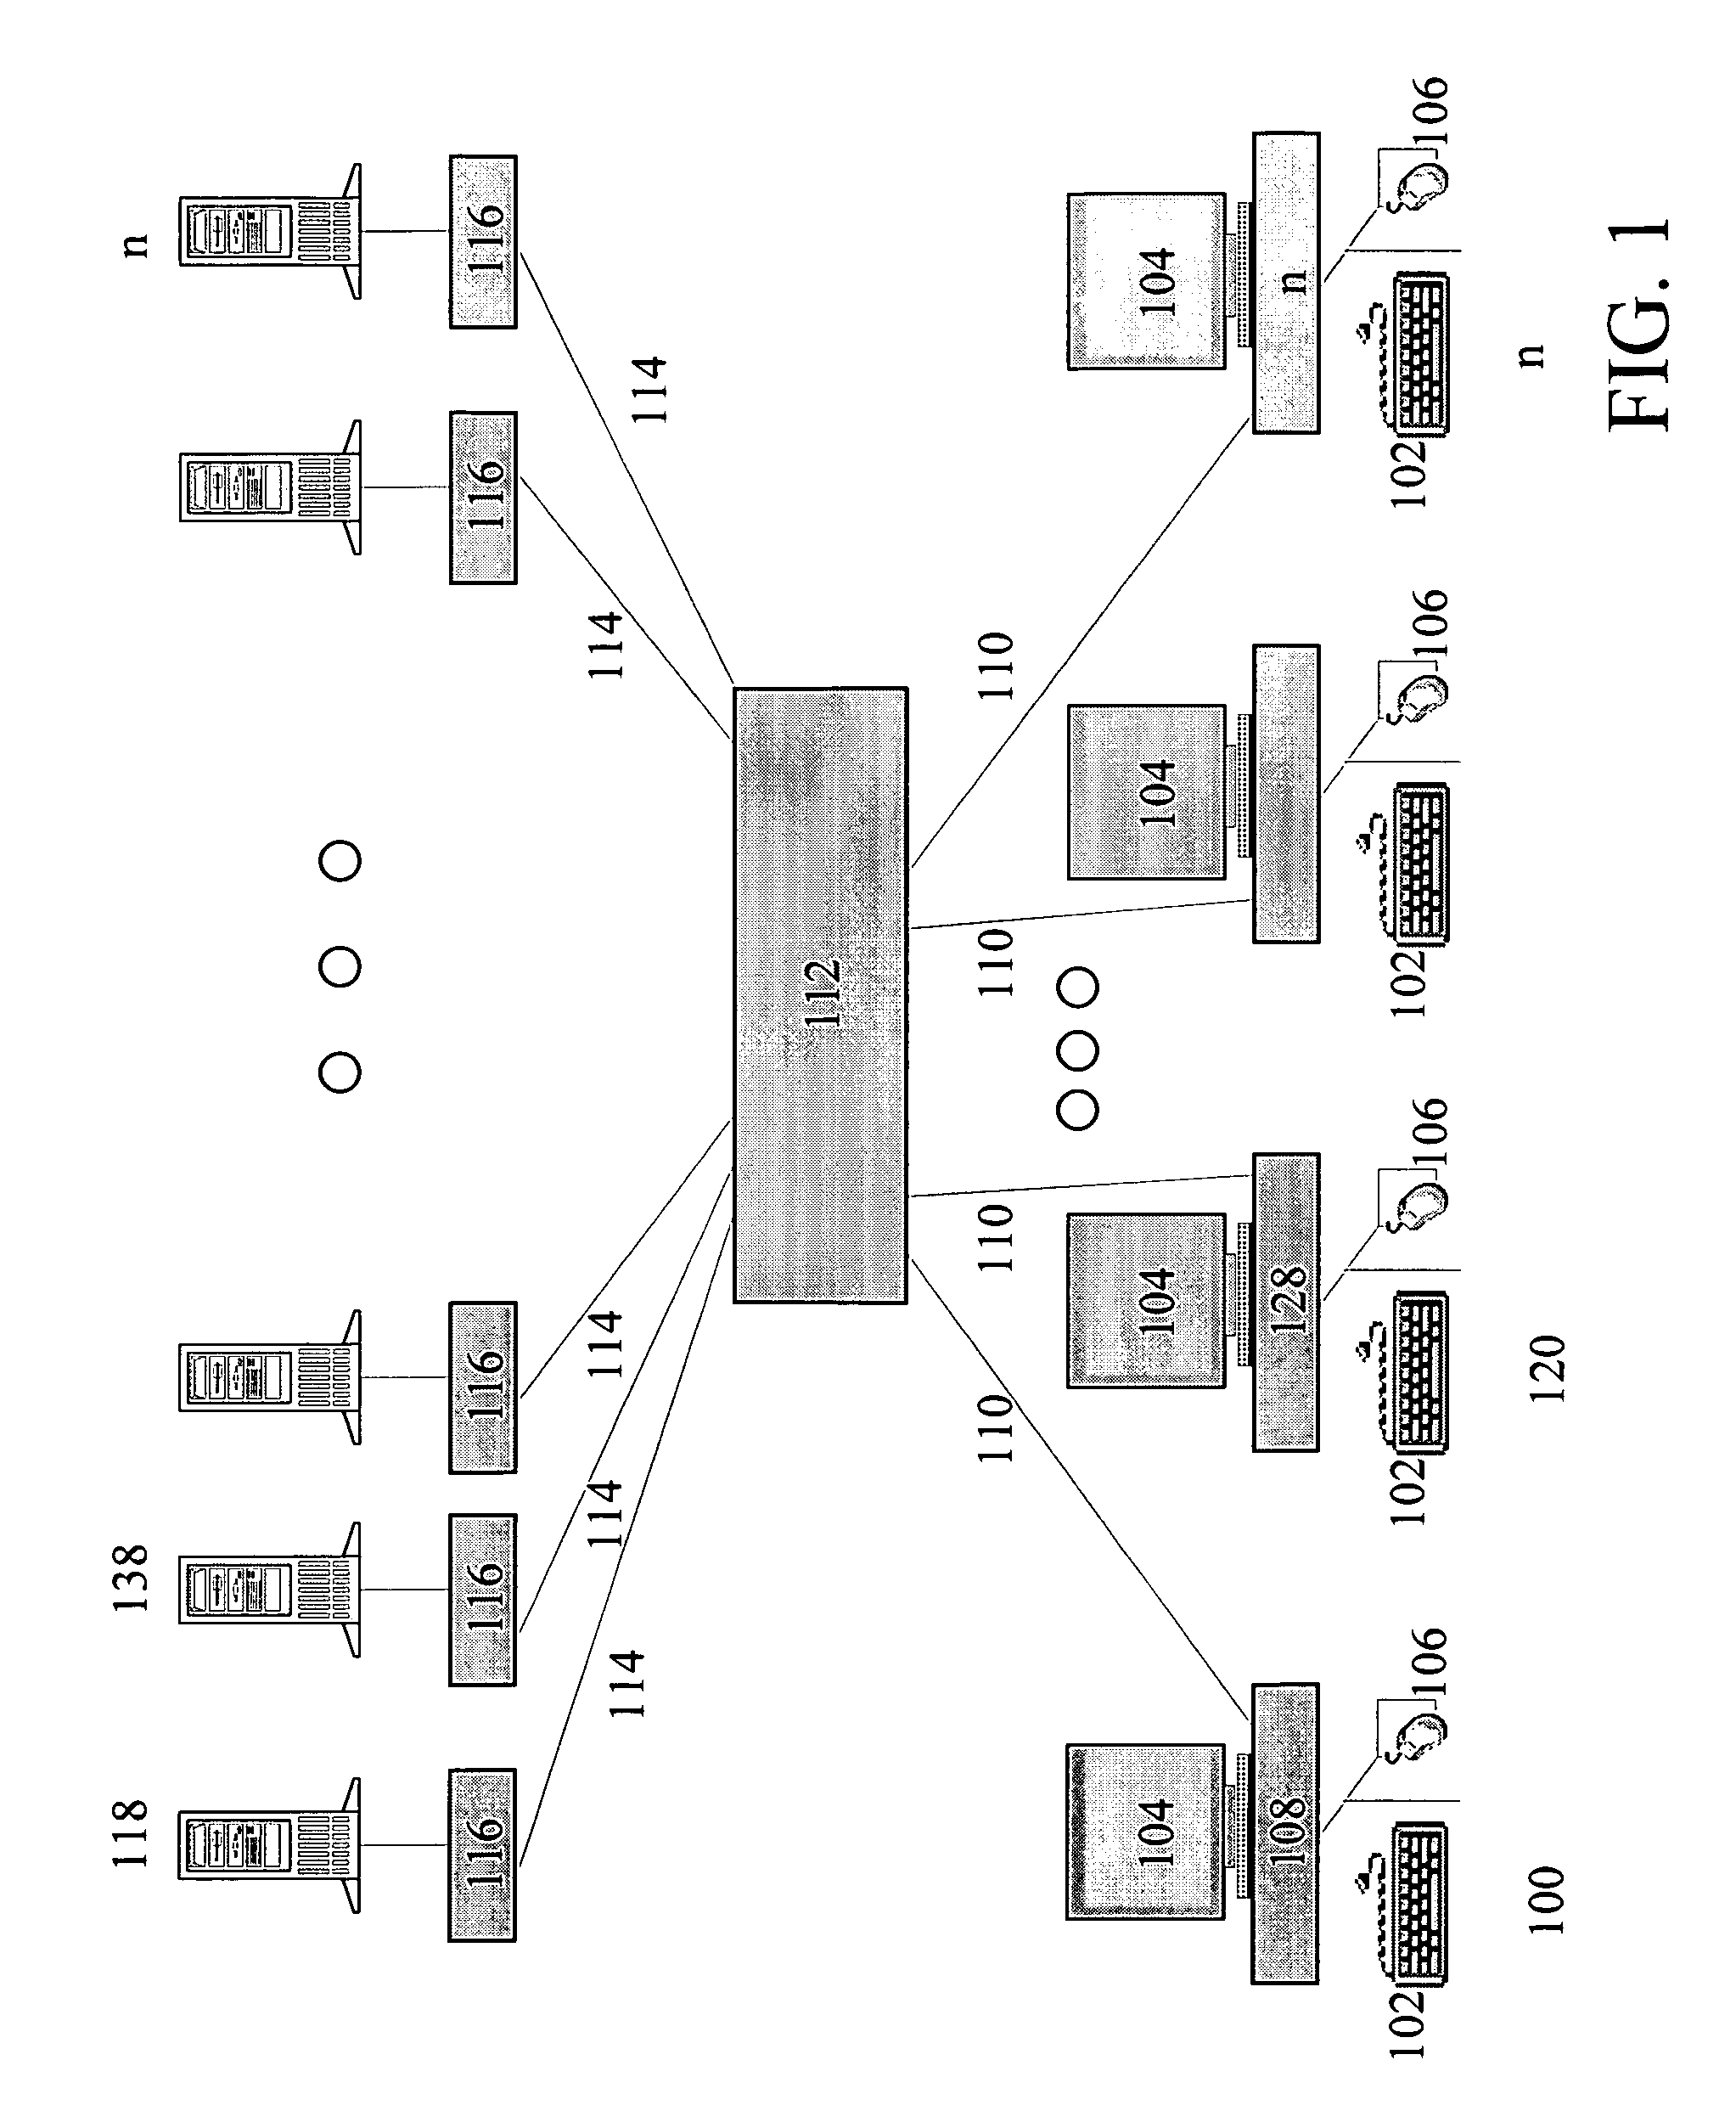 Intelligent modular server management system for selectively operating a plurality of computers